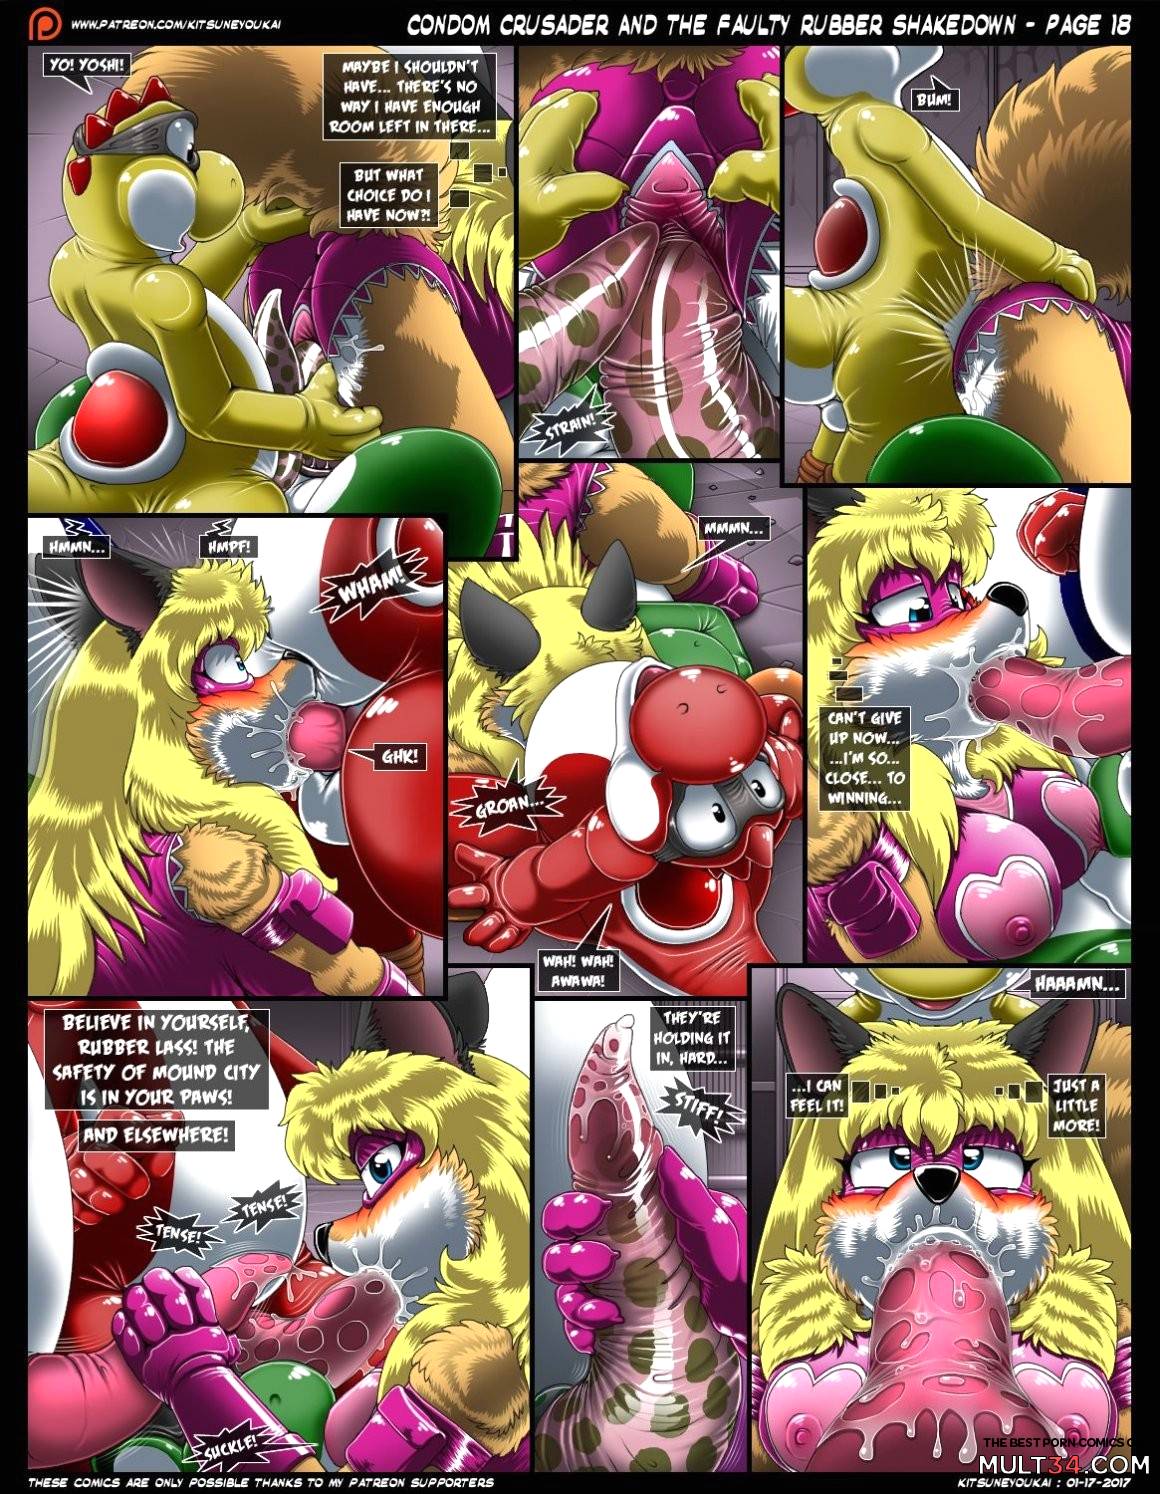 Condom Crusader And The Faulty Rubber Shakedown page 19